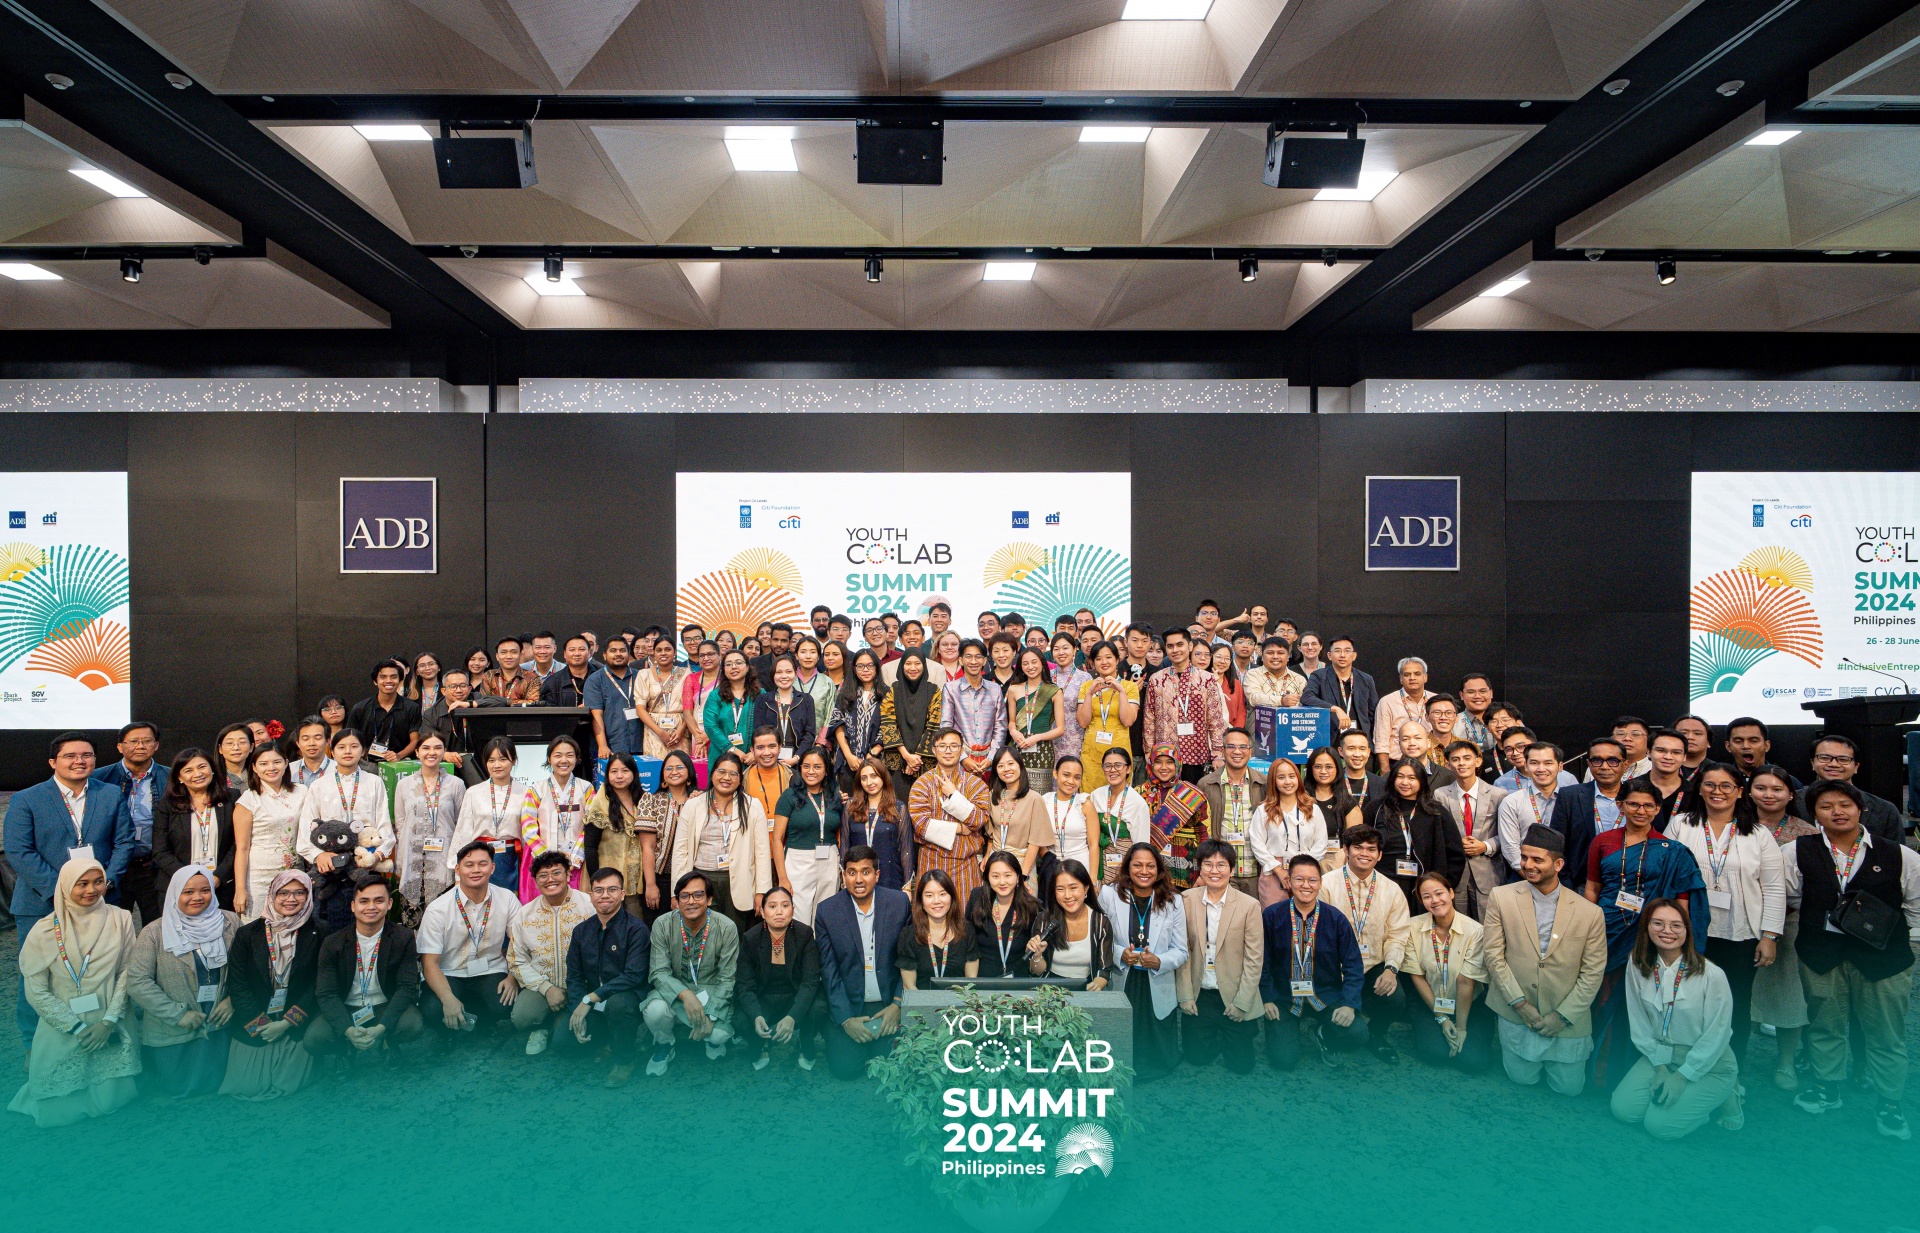 The 2024 Youth Co:Lab Summit allows young people to shine